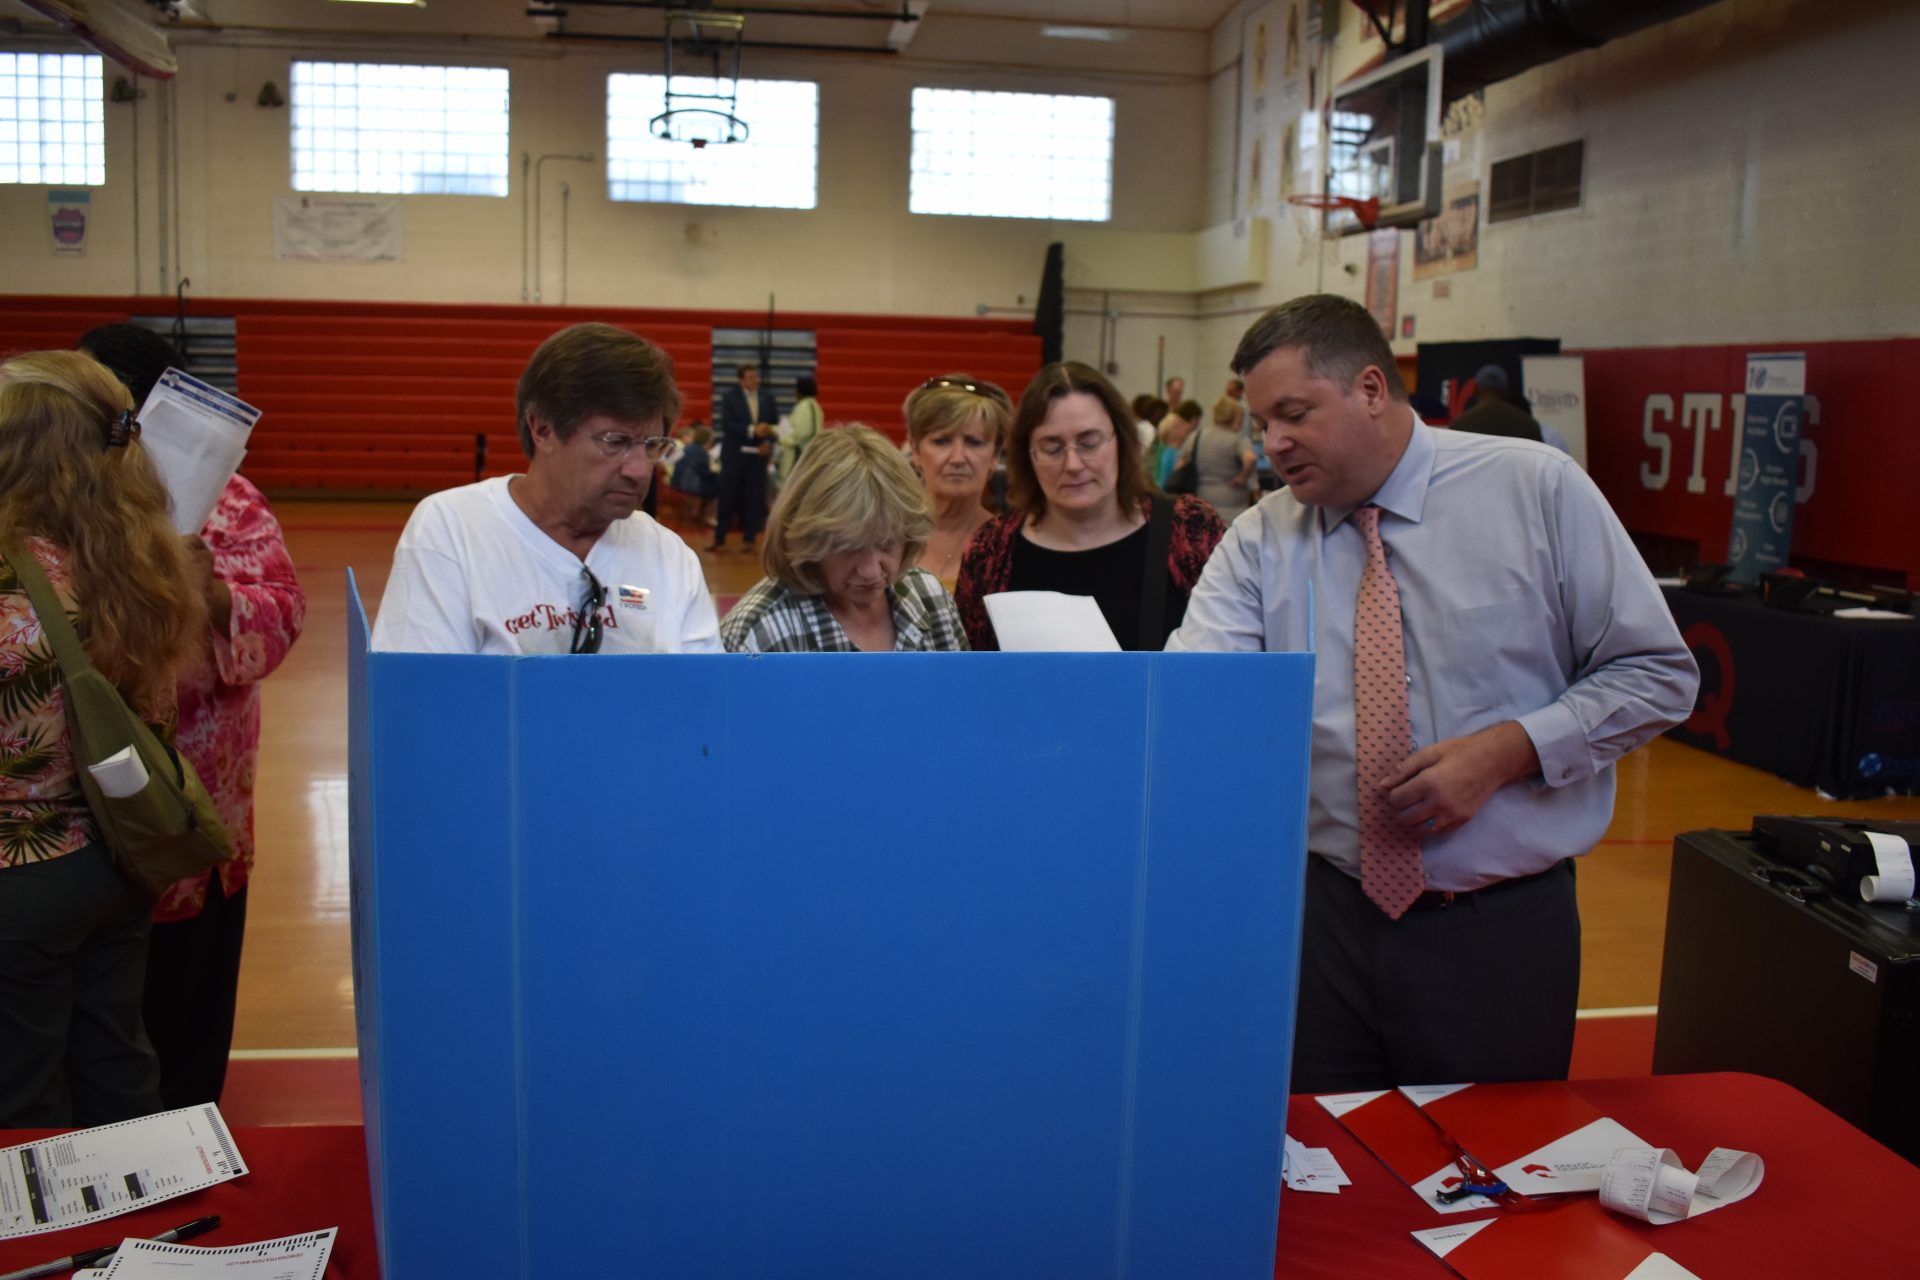 People look at one of the options for a new voting system during a demonstration at Susquehanna Township High School on June 11, 2019.